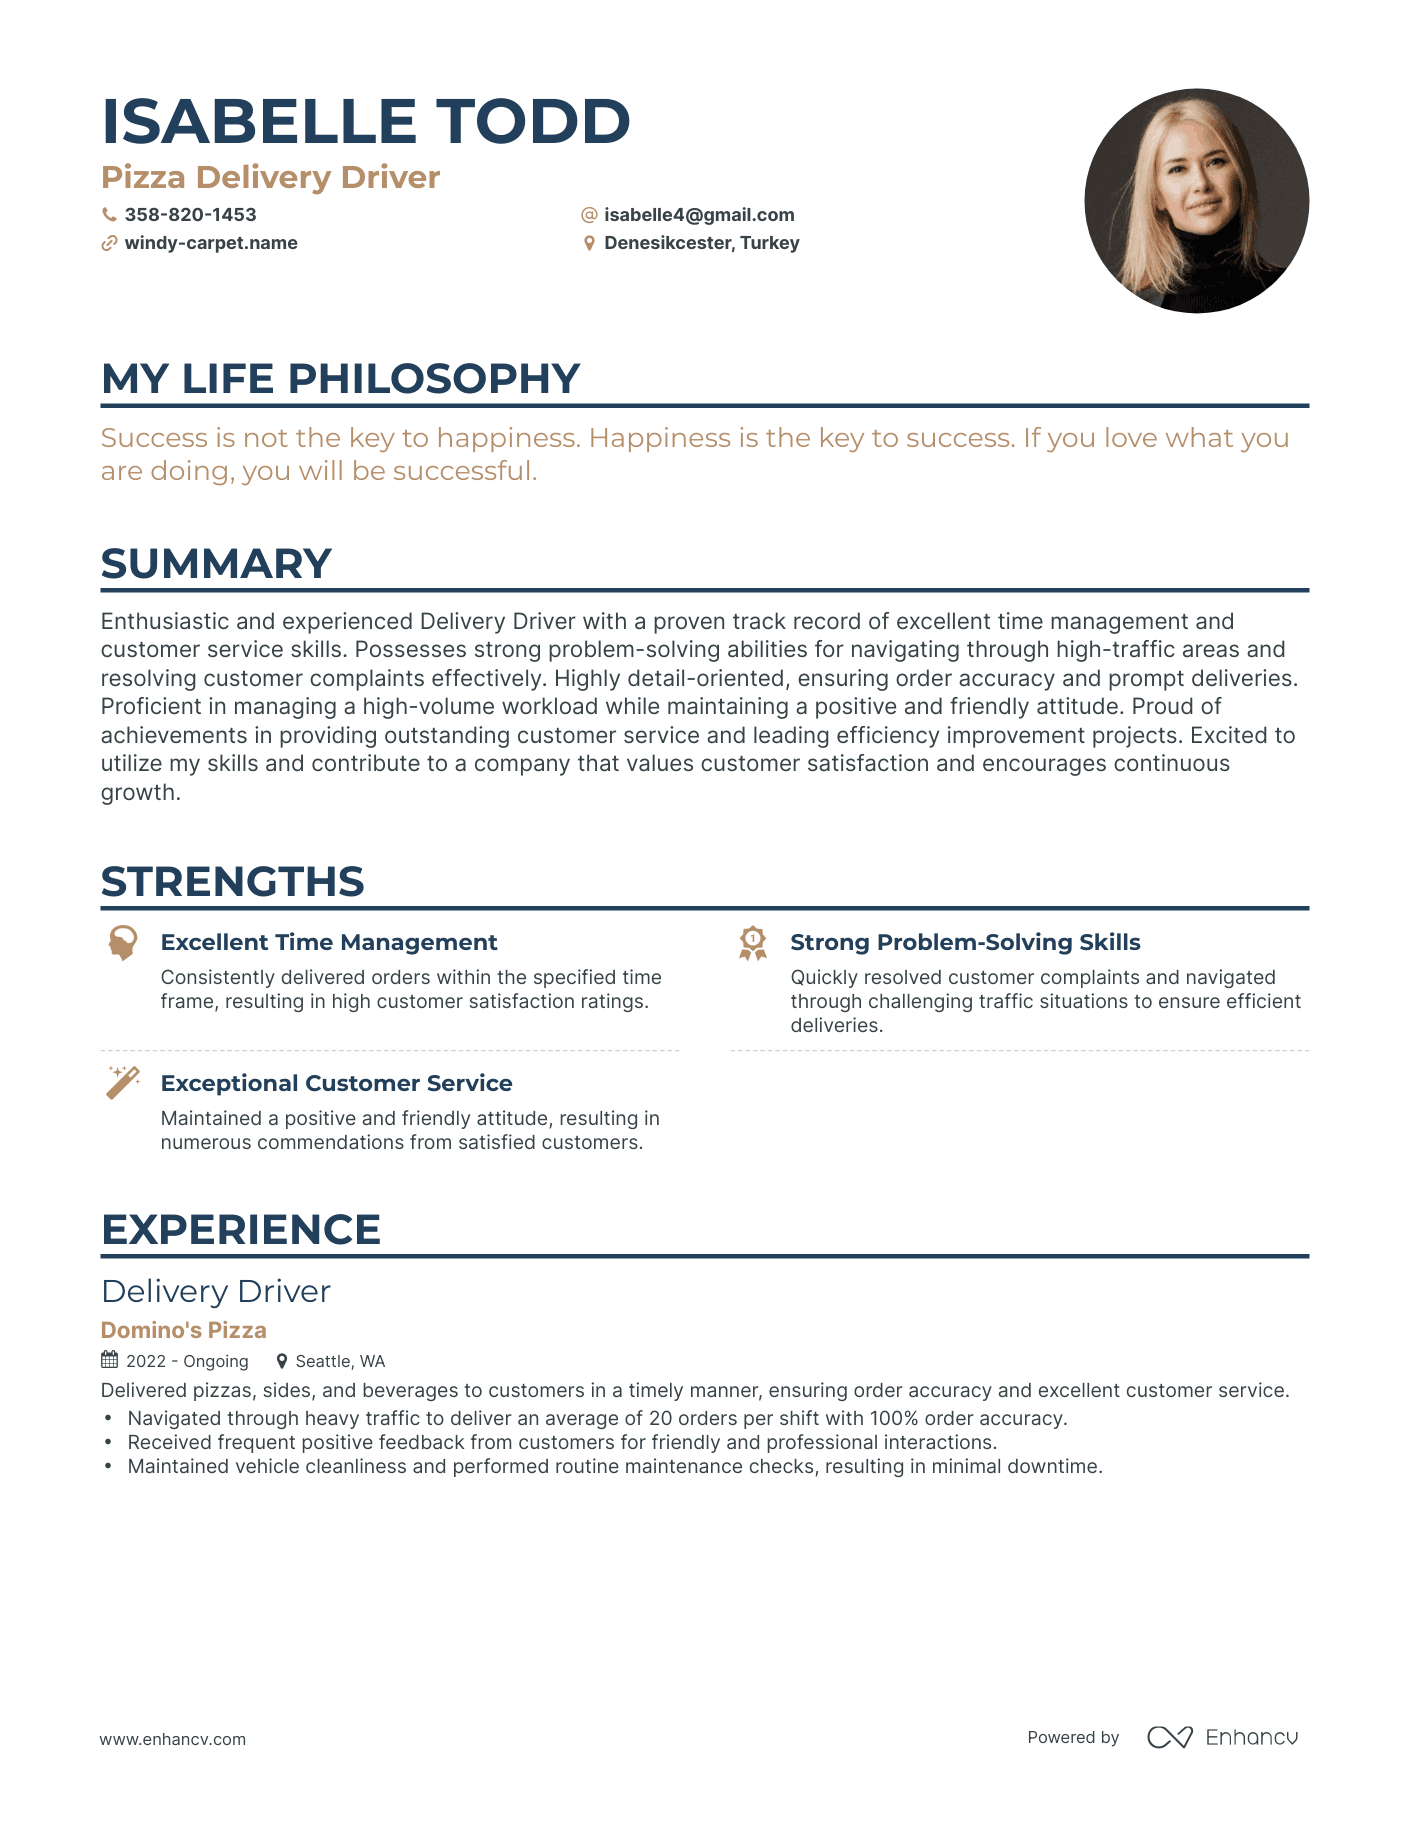 Creative Pizza Delivery Driver Resume Example